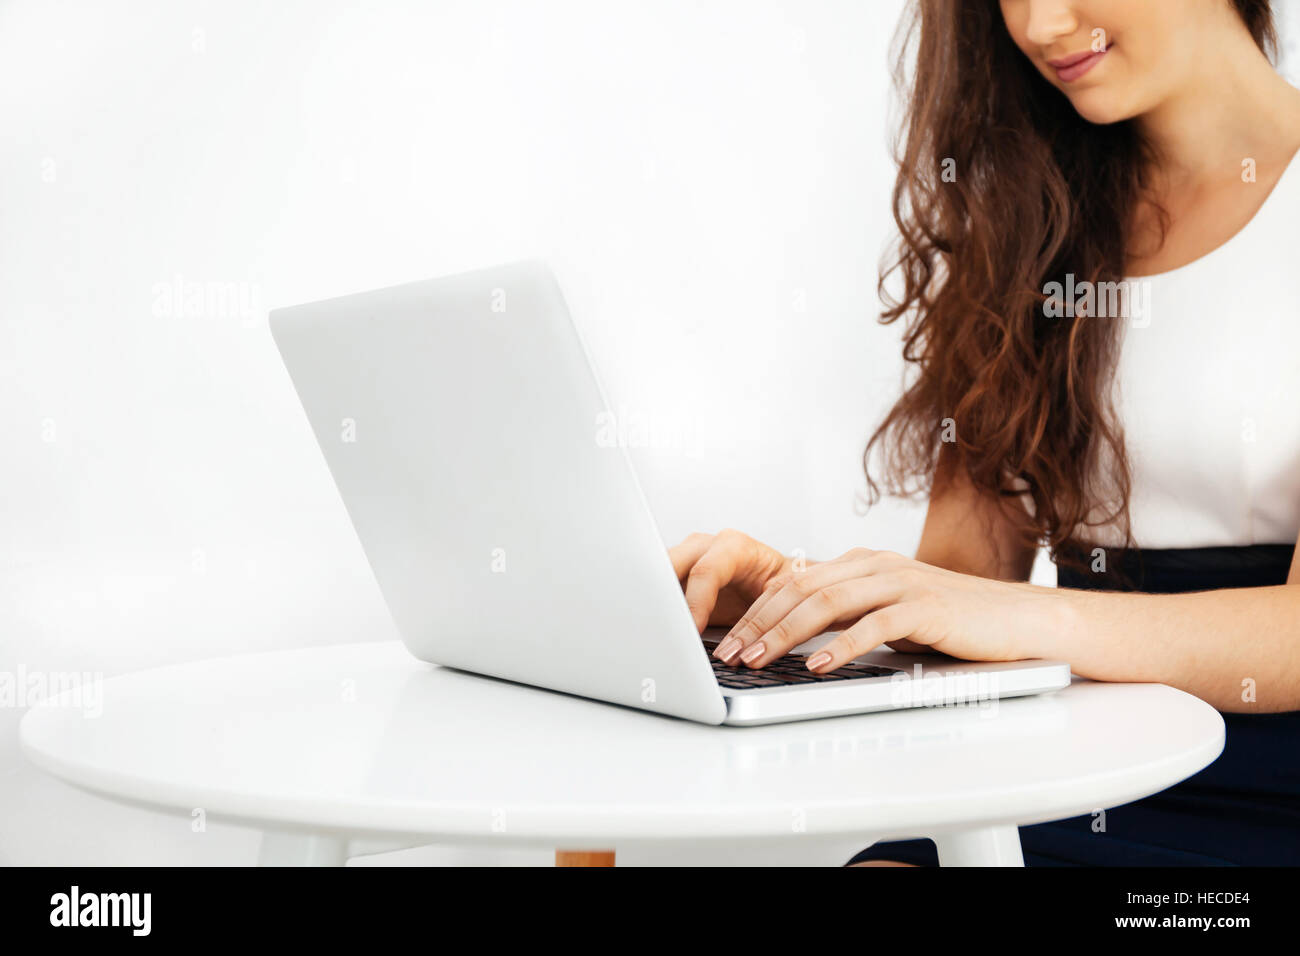 Beautiful Caucasian woman working on laptop on white desk over white isolated background with copy space Stock Photo